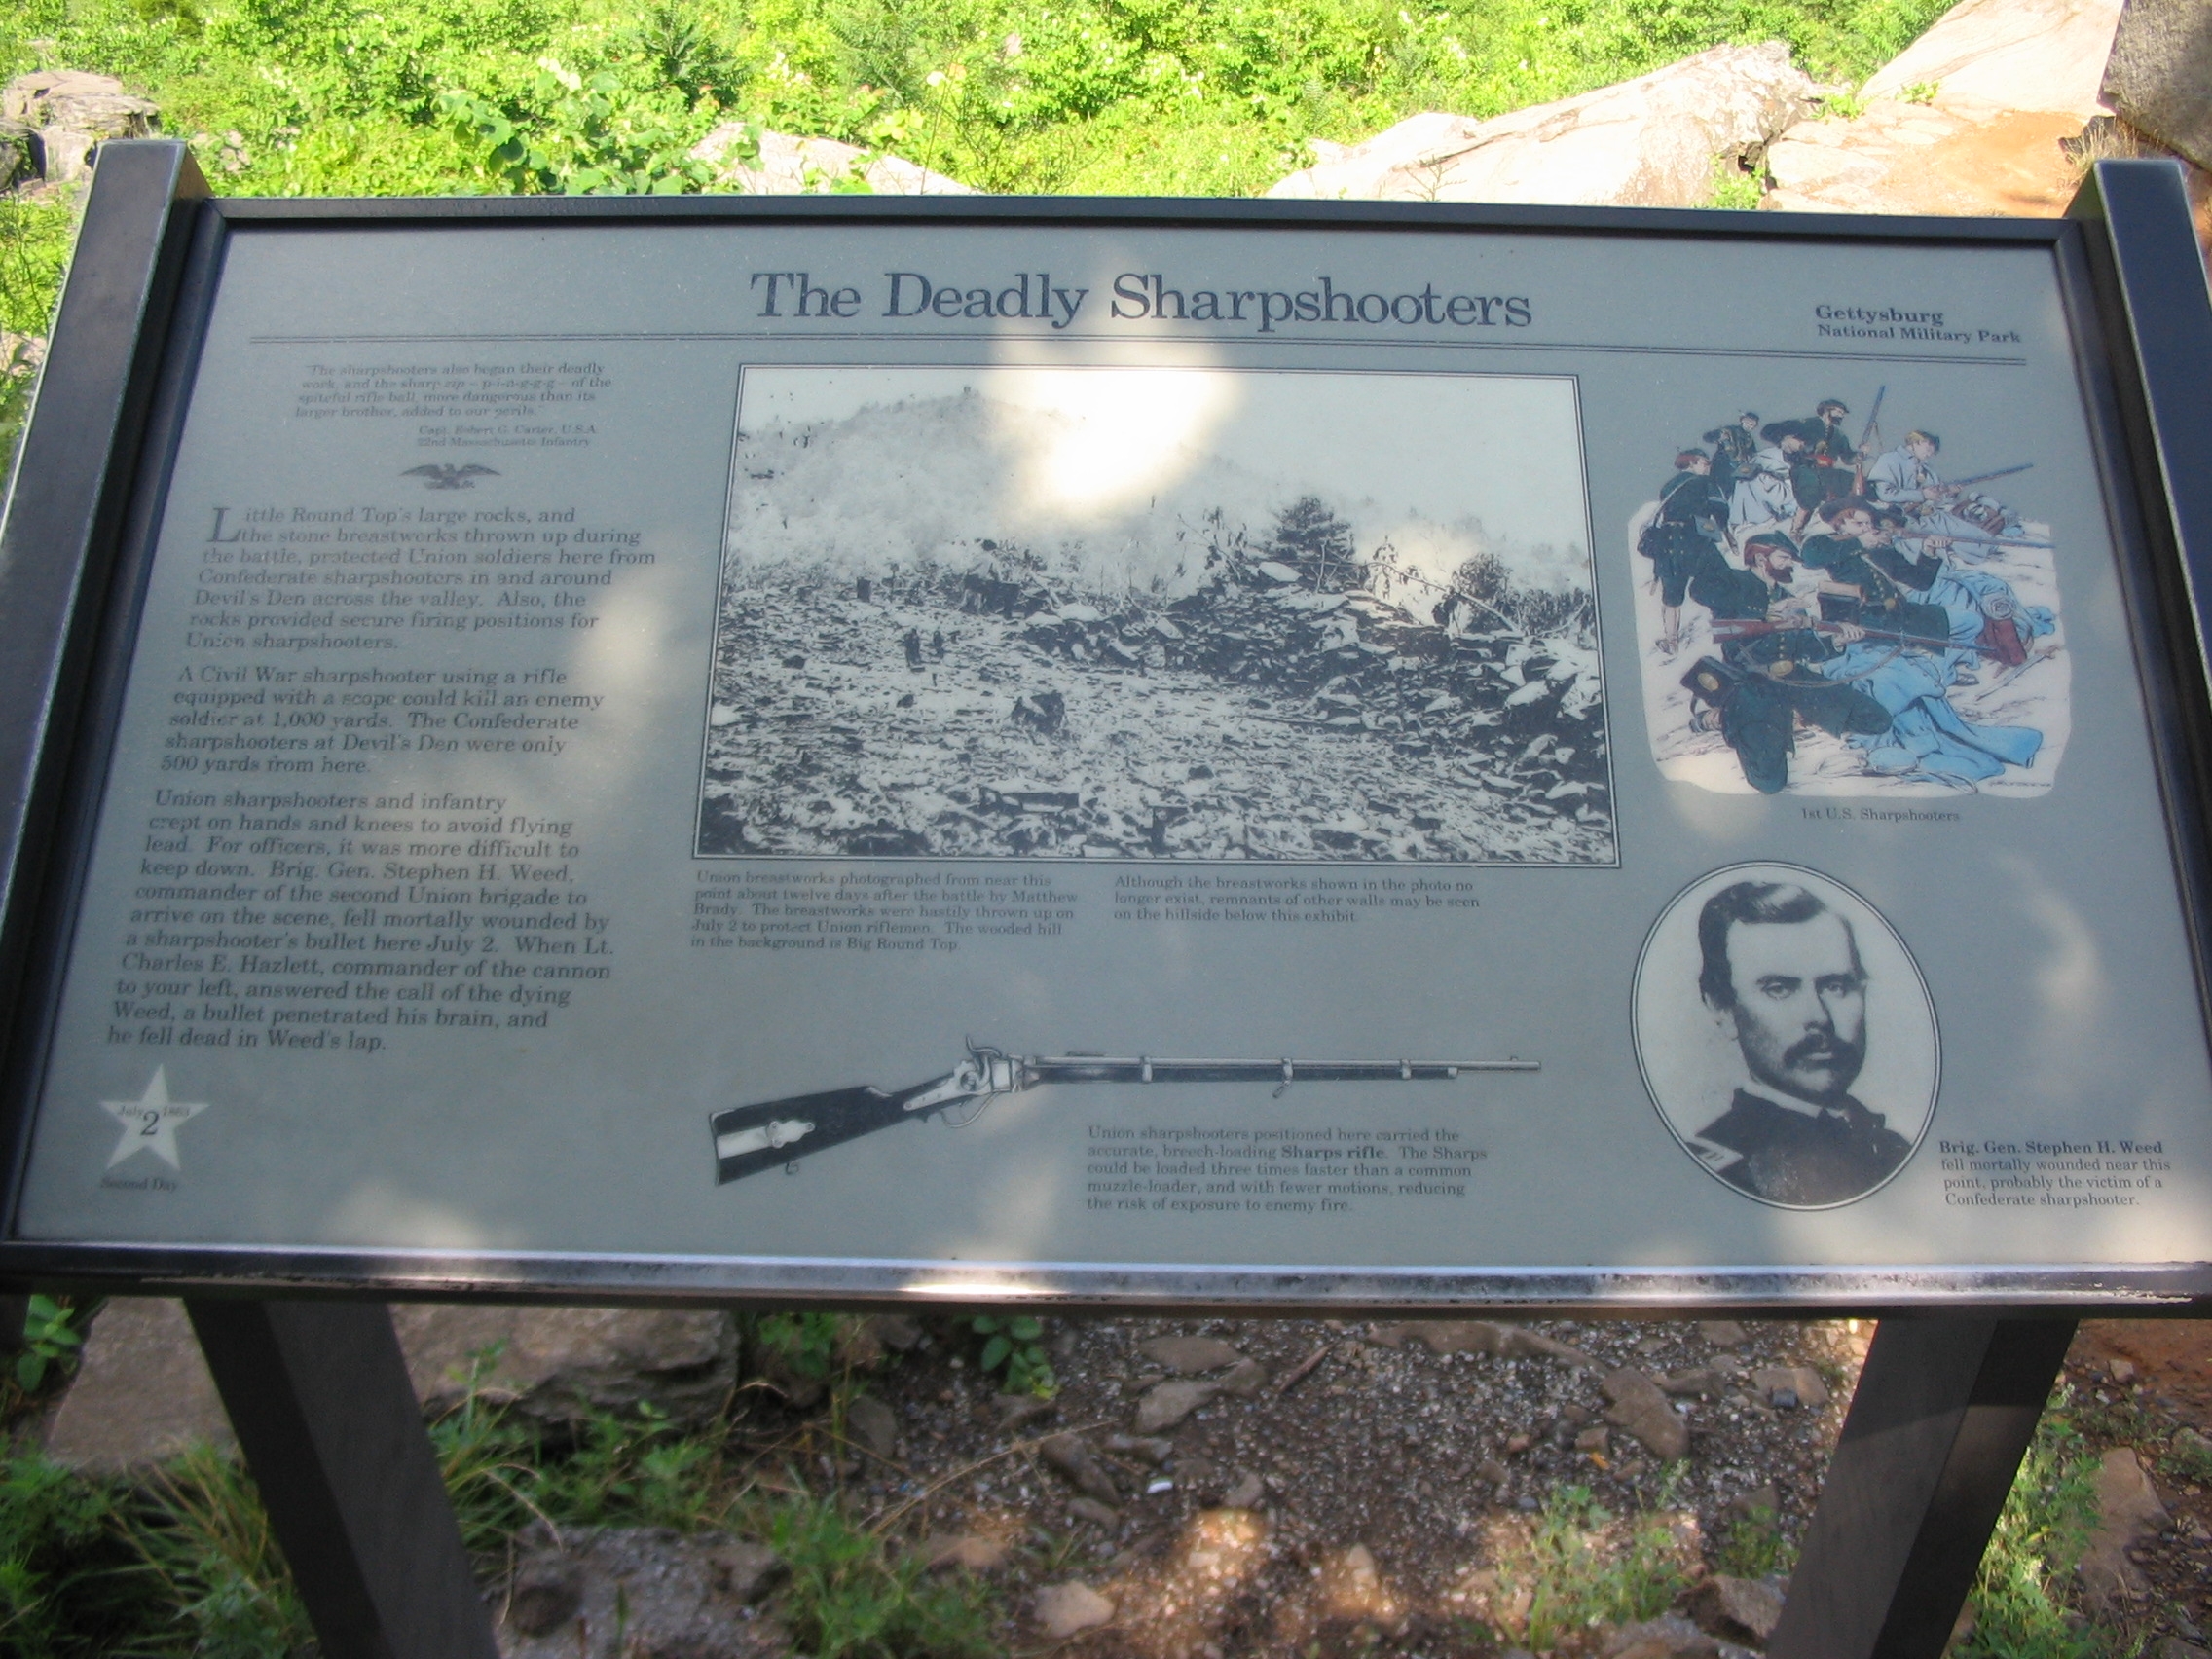 The Deadly Sharpshooters Marker